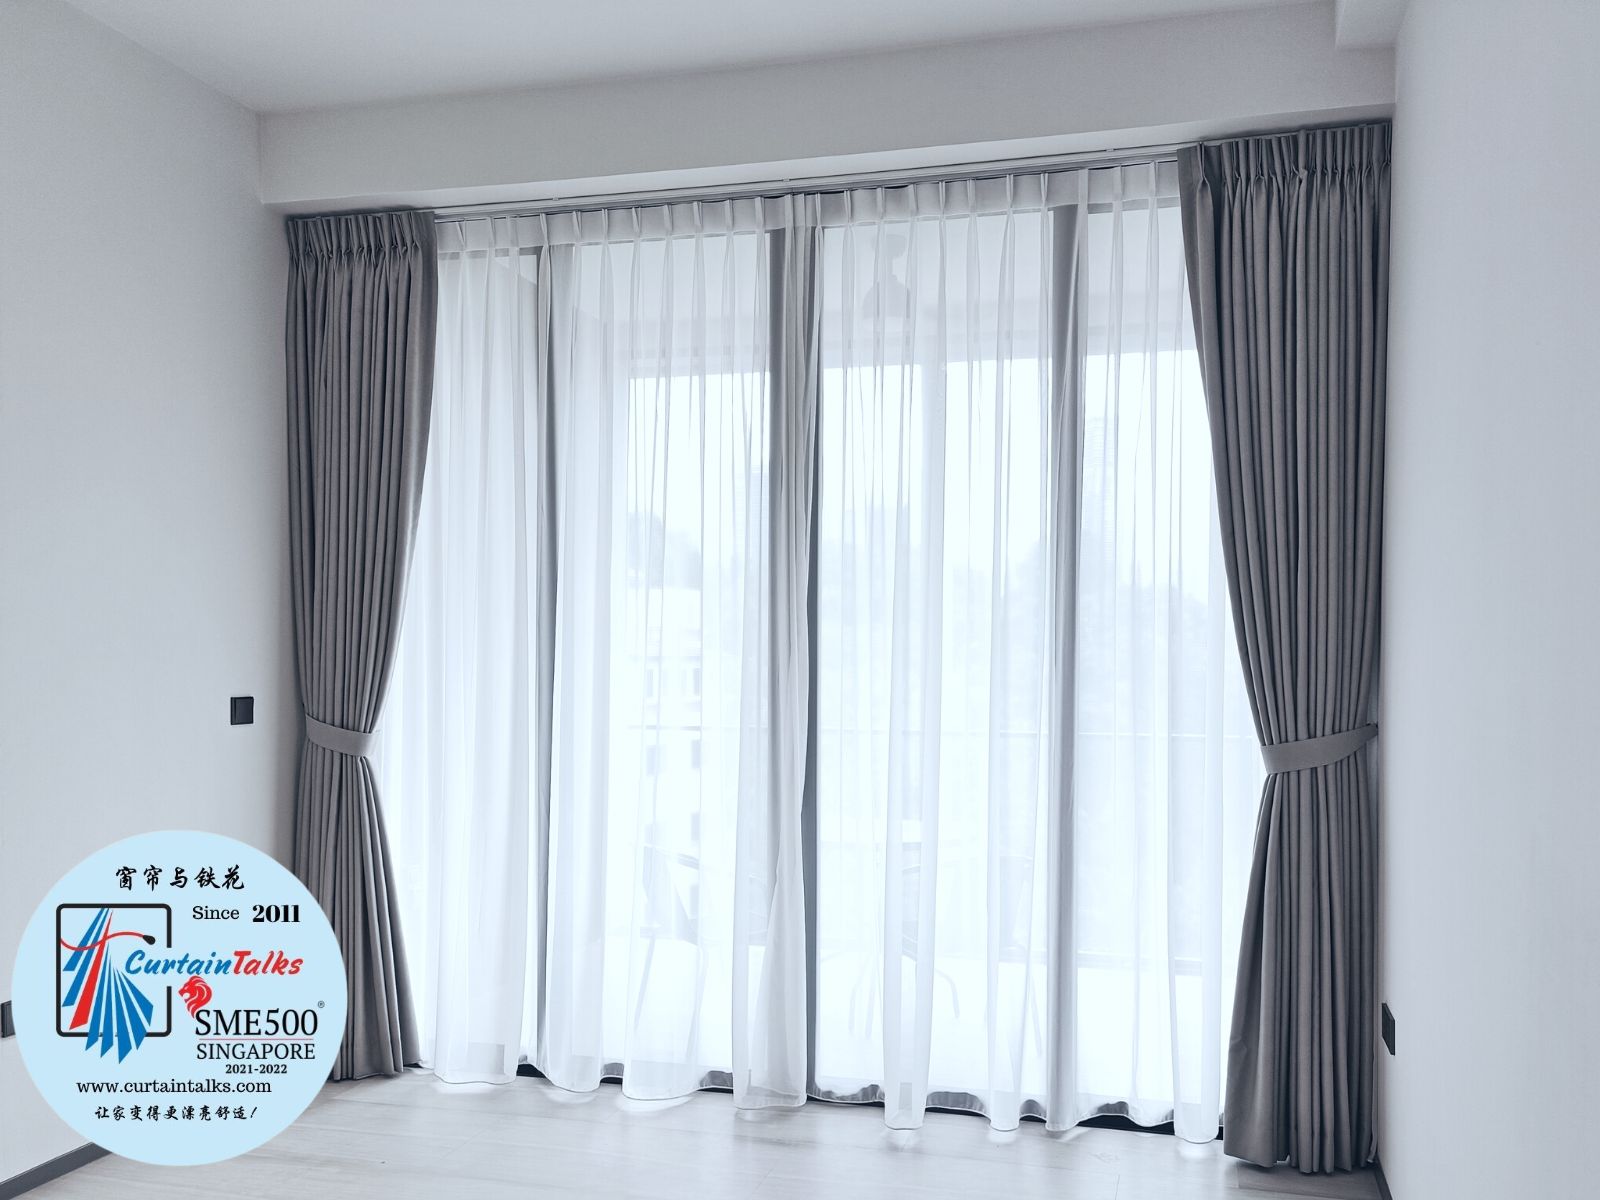 This is a Picture for Day and night curtain at master's bedroom for Singapore condo at 25 Rosewood Drive, Casablanca